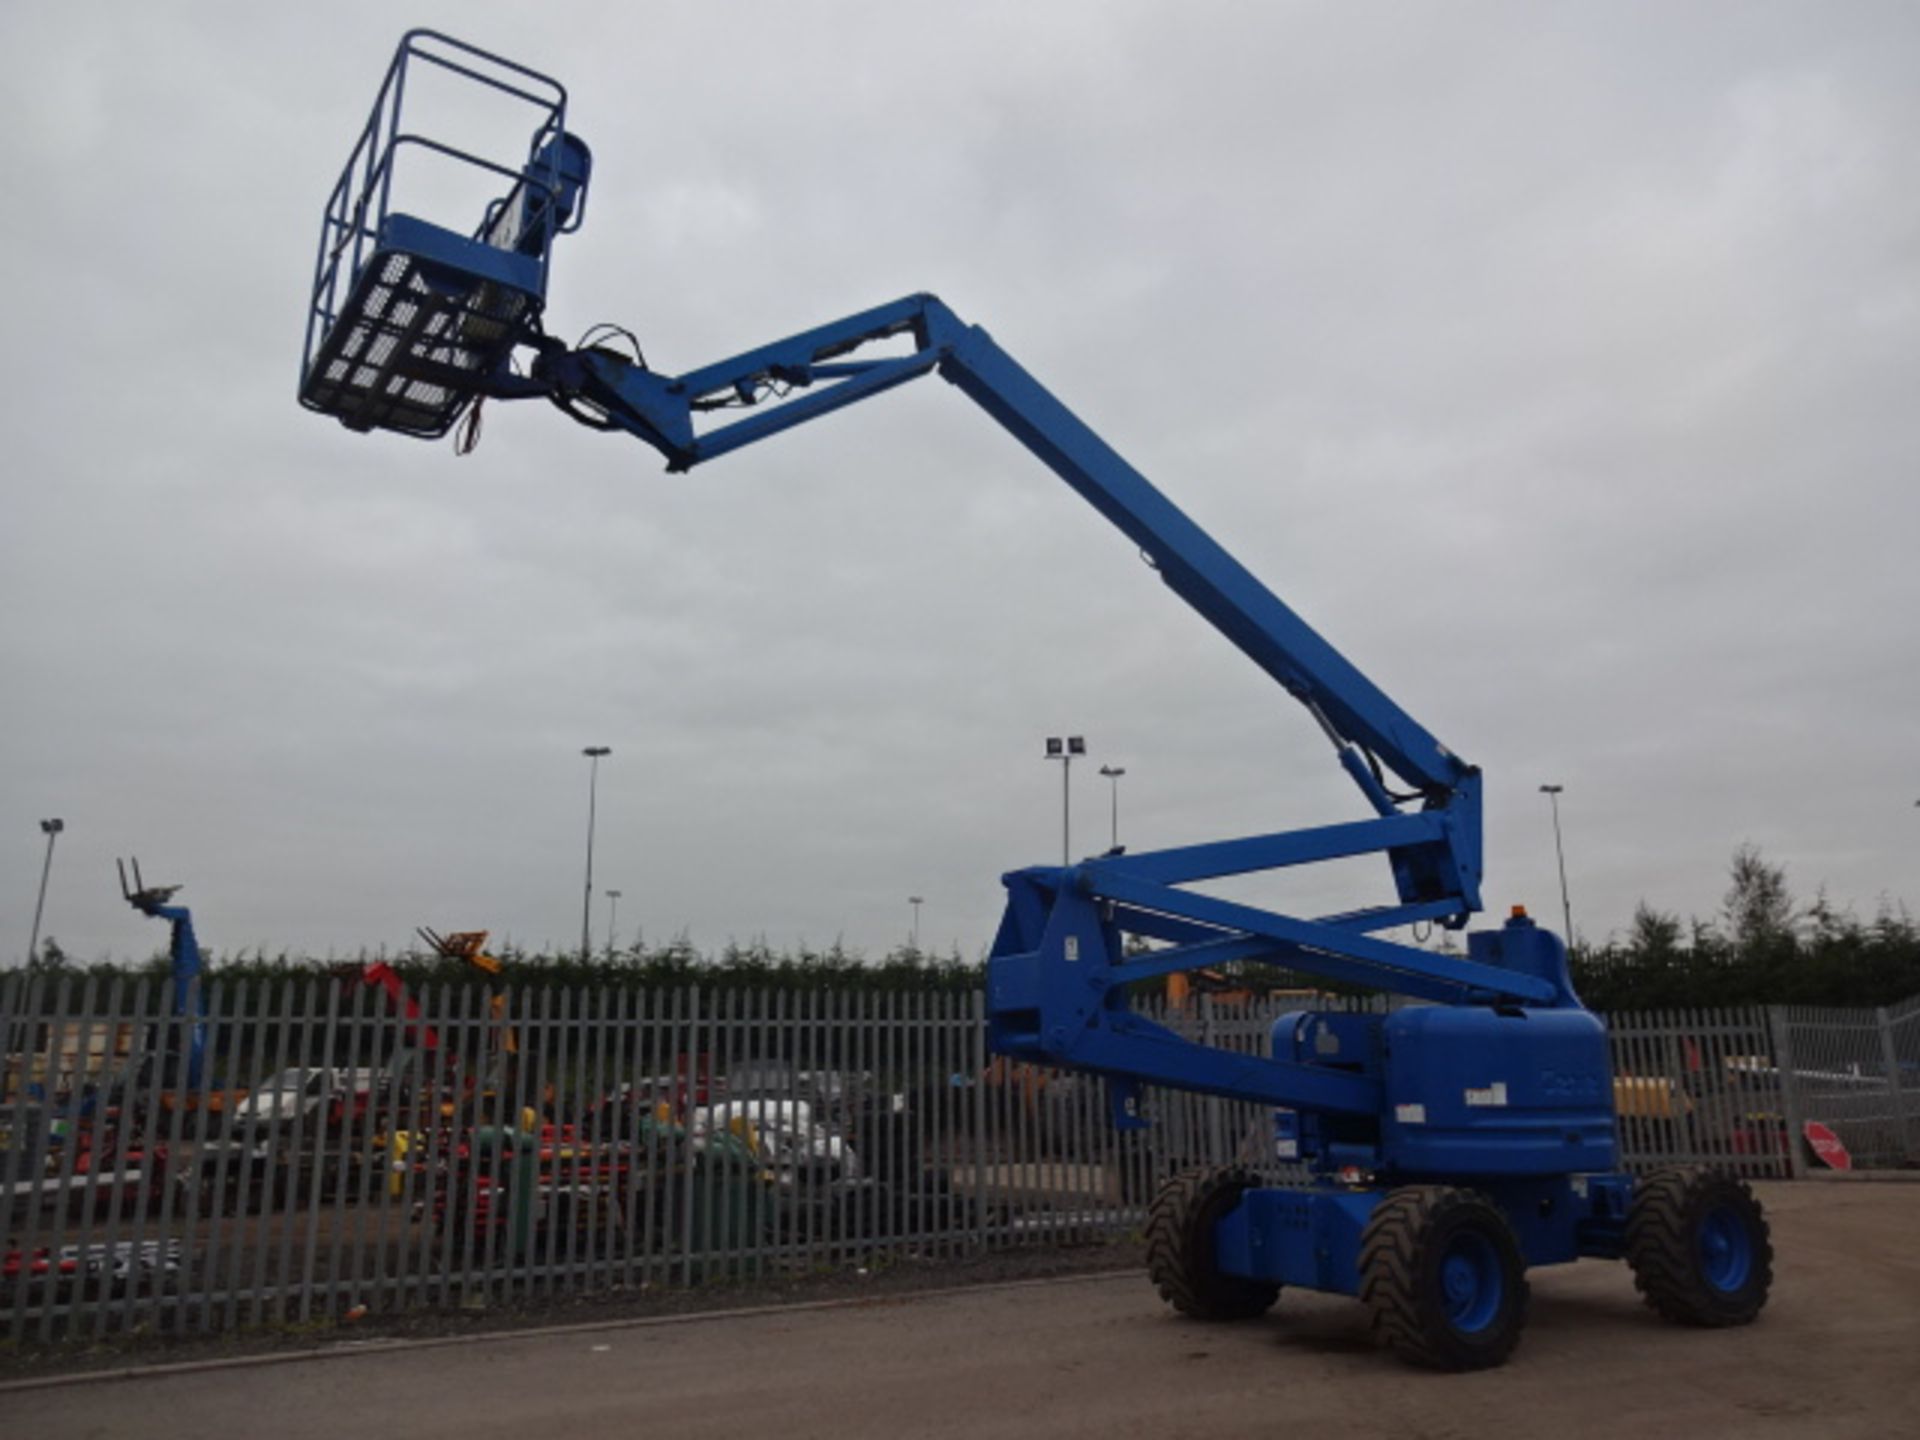 1999 GENIE Z60/34 60' articulated boom lift S/n: 22055 with fly jib (RDL) - Image 9 of 9